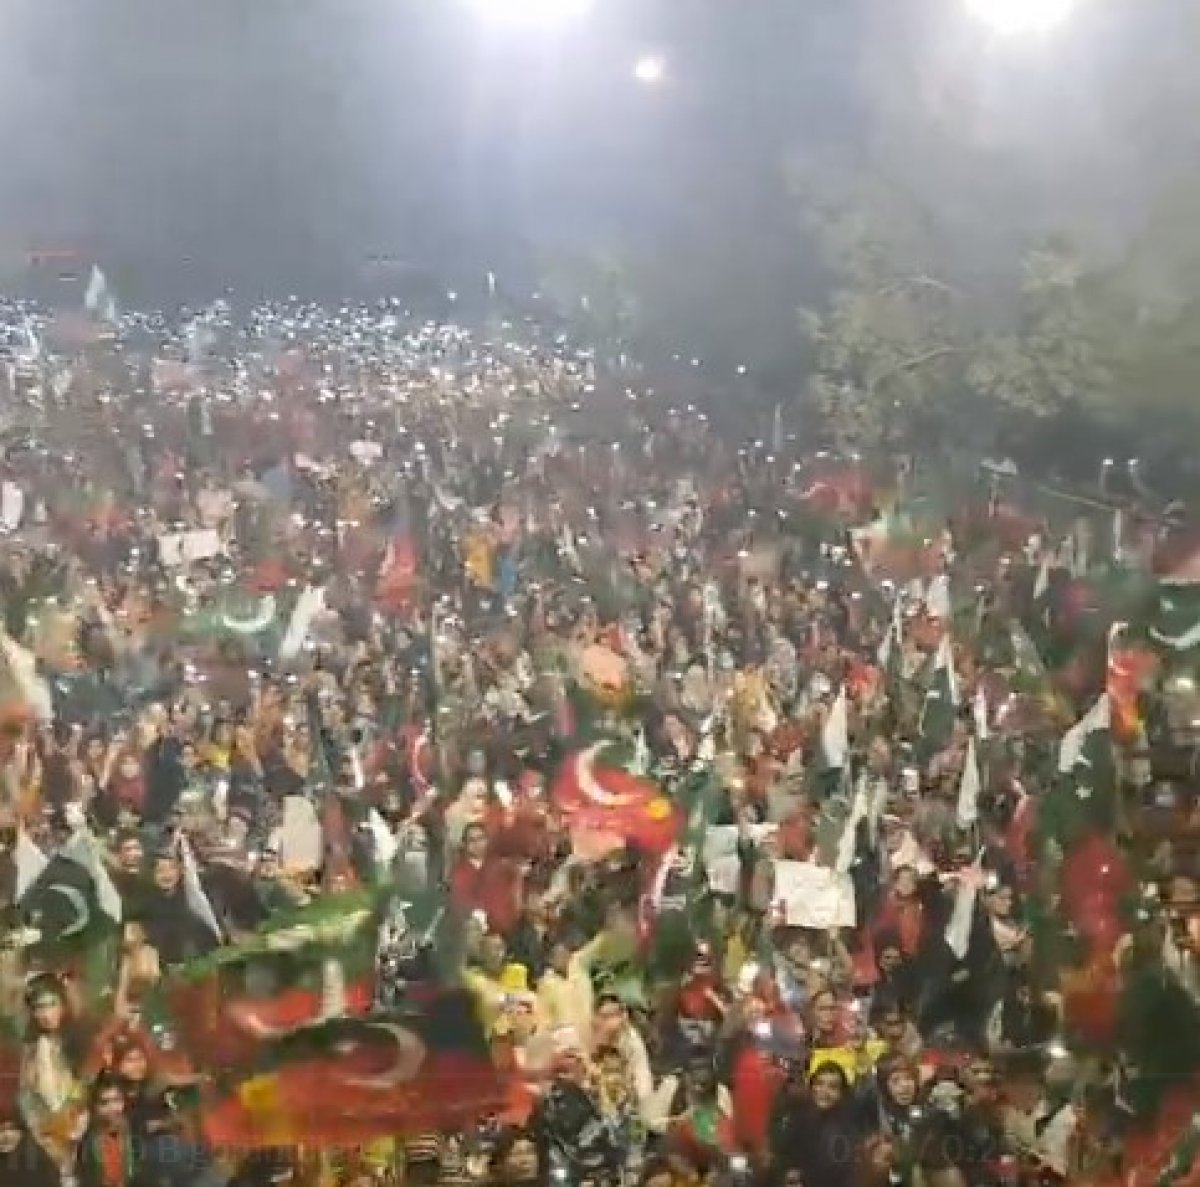 Imran Khan supporters gathered in the squares in Pakistan #2